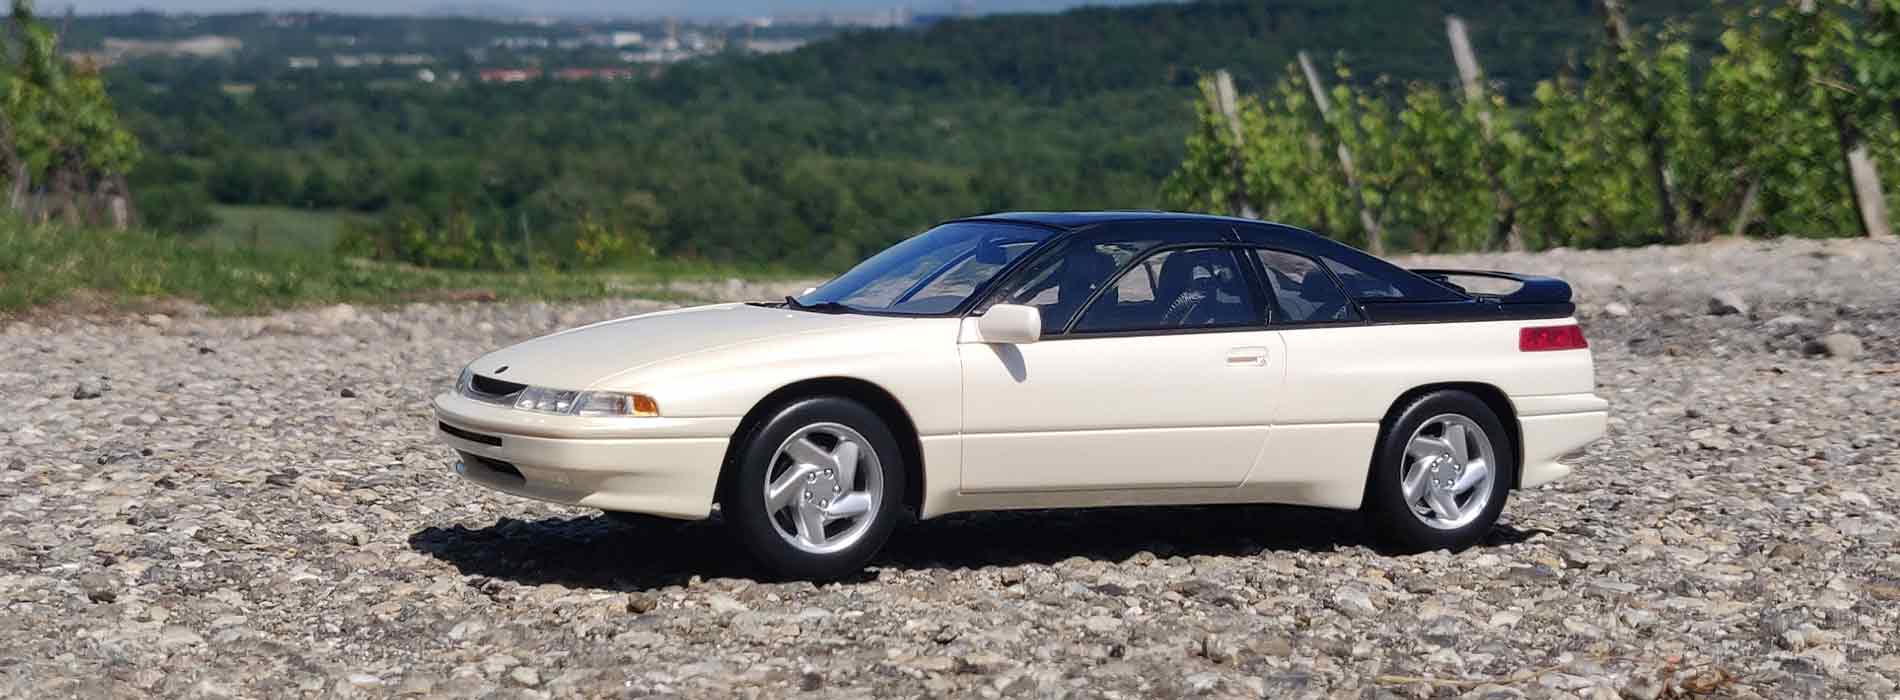 Subaru Alcyone SVX | Aircraft inspired vehicle | DNA Collectibles